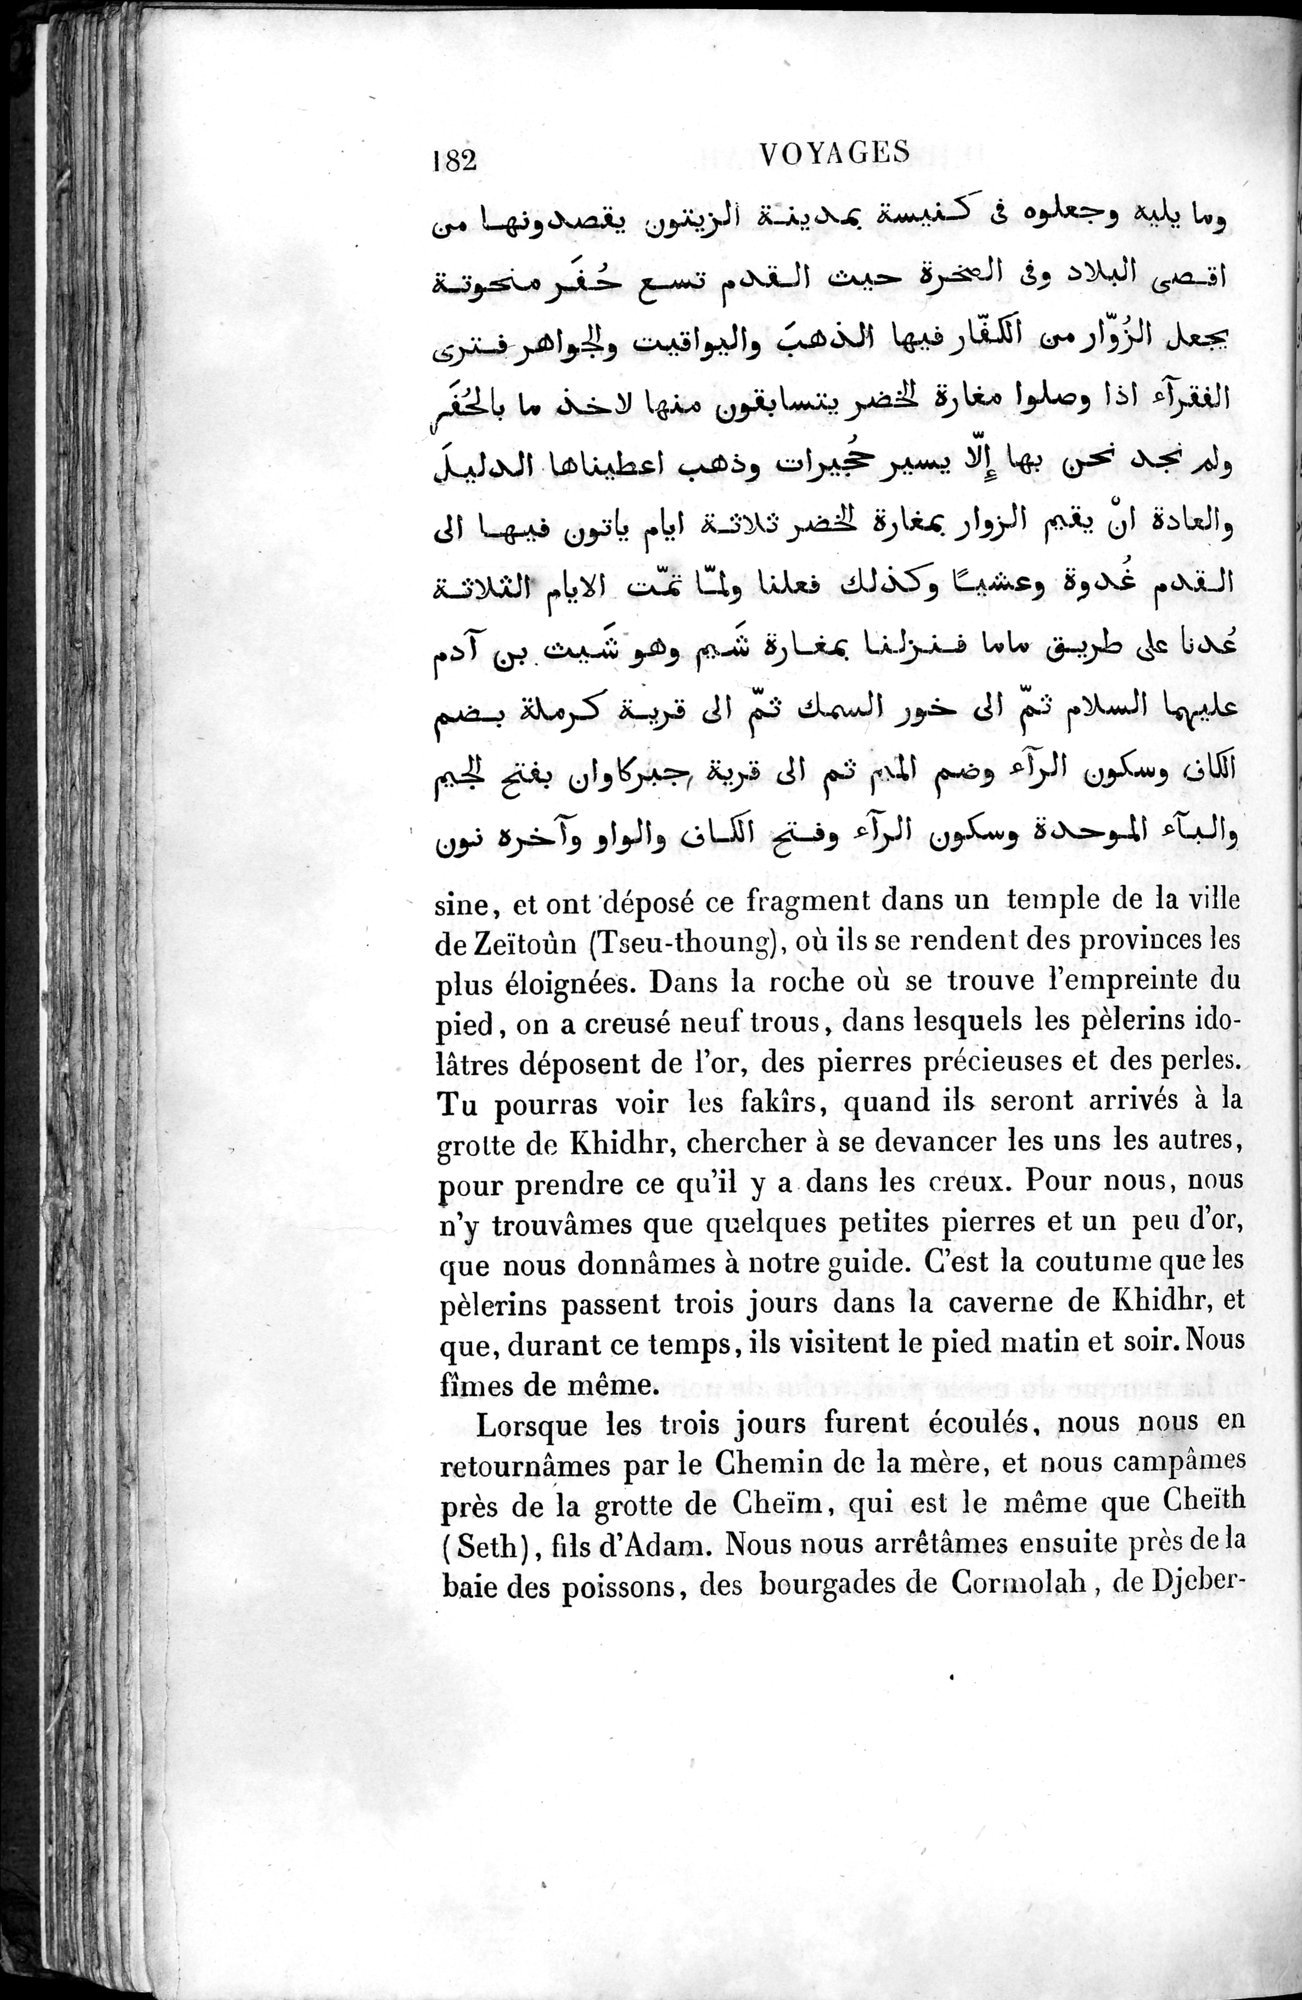 Voyages d'Ibn Batoutah : vol.4 / Page 194 (Grayscale High Resolution Image)